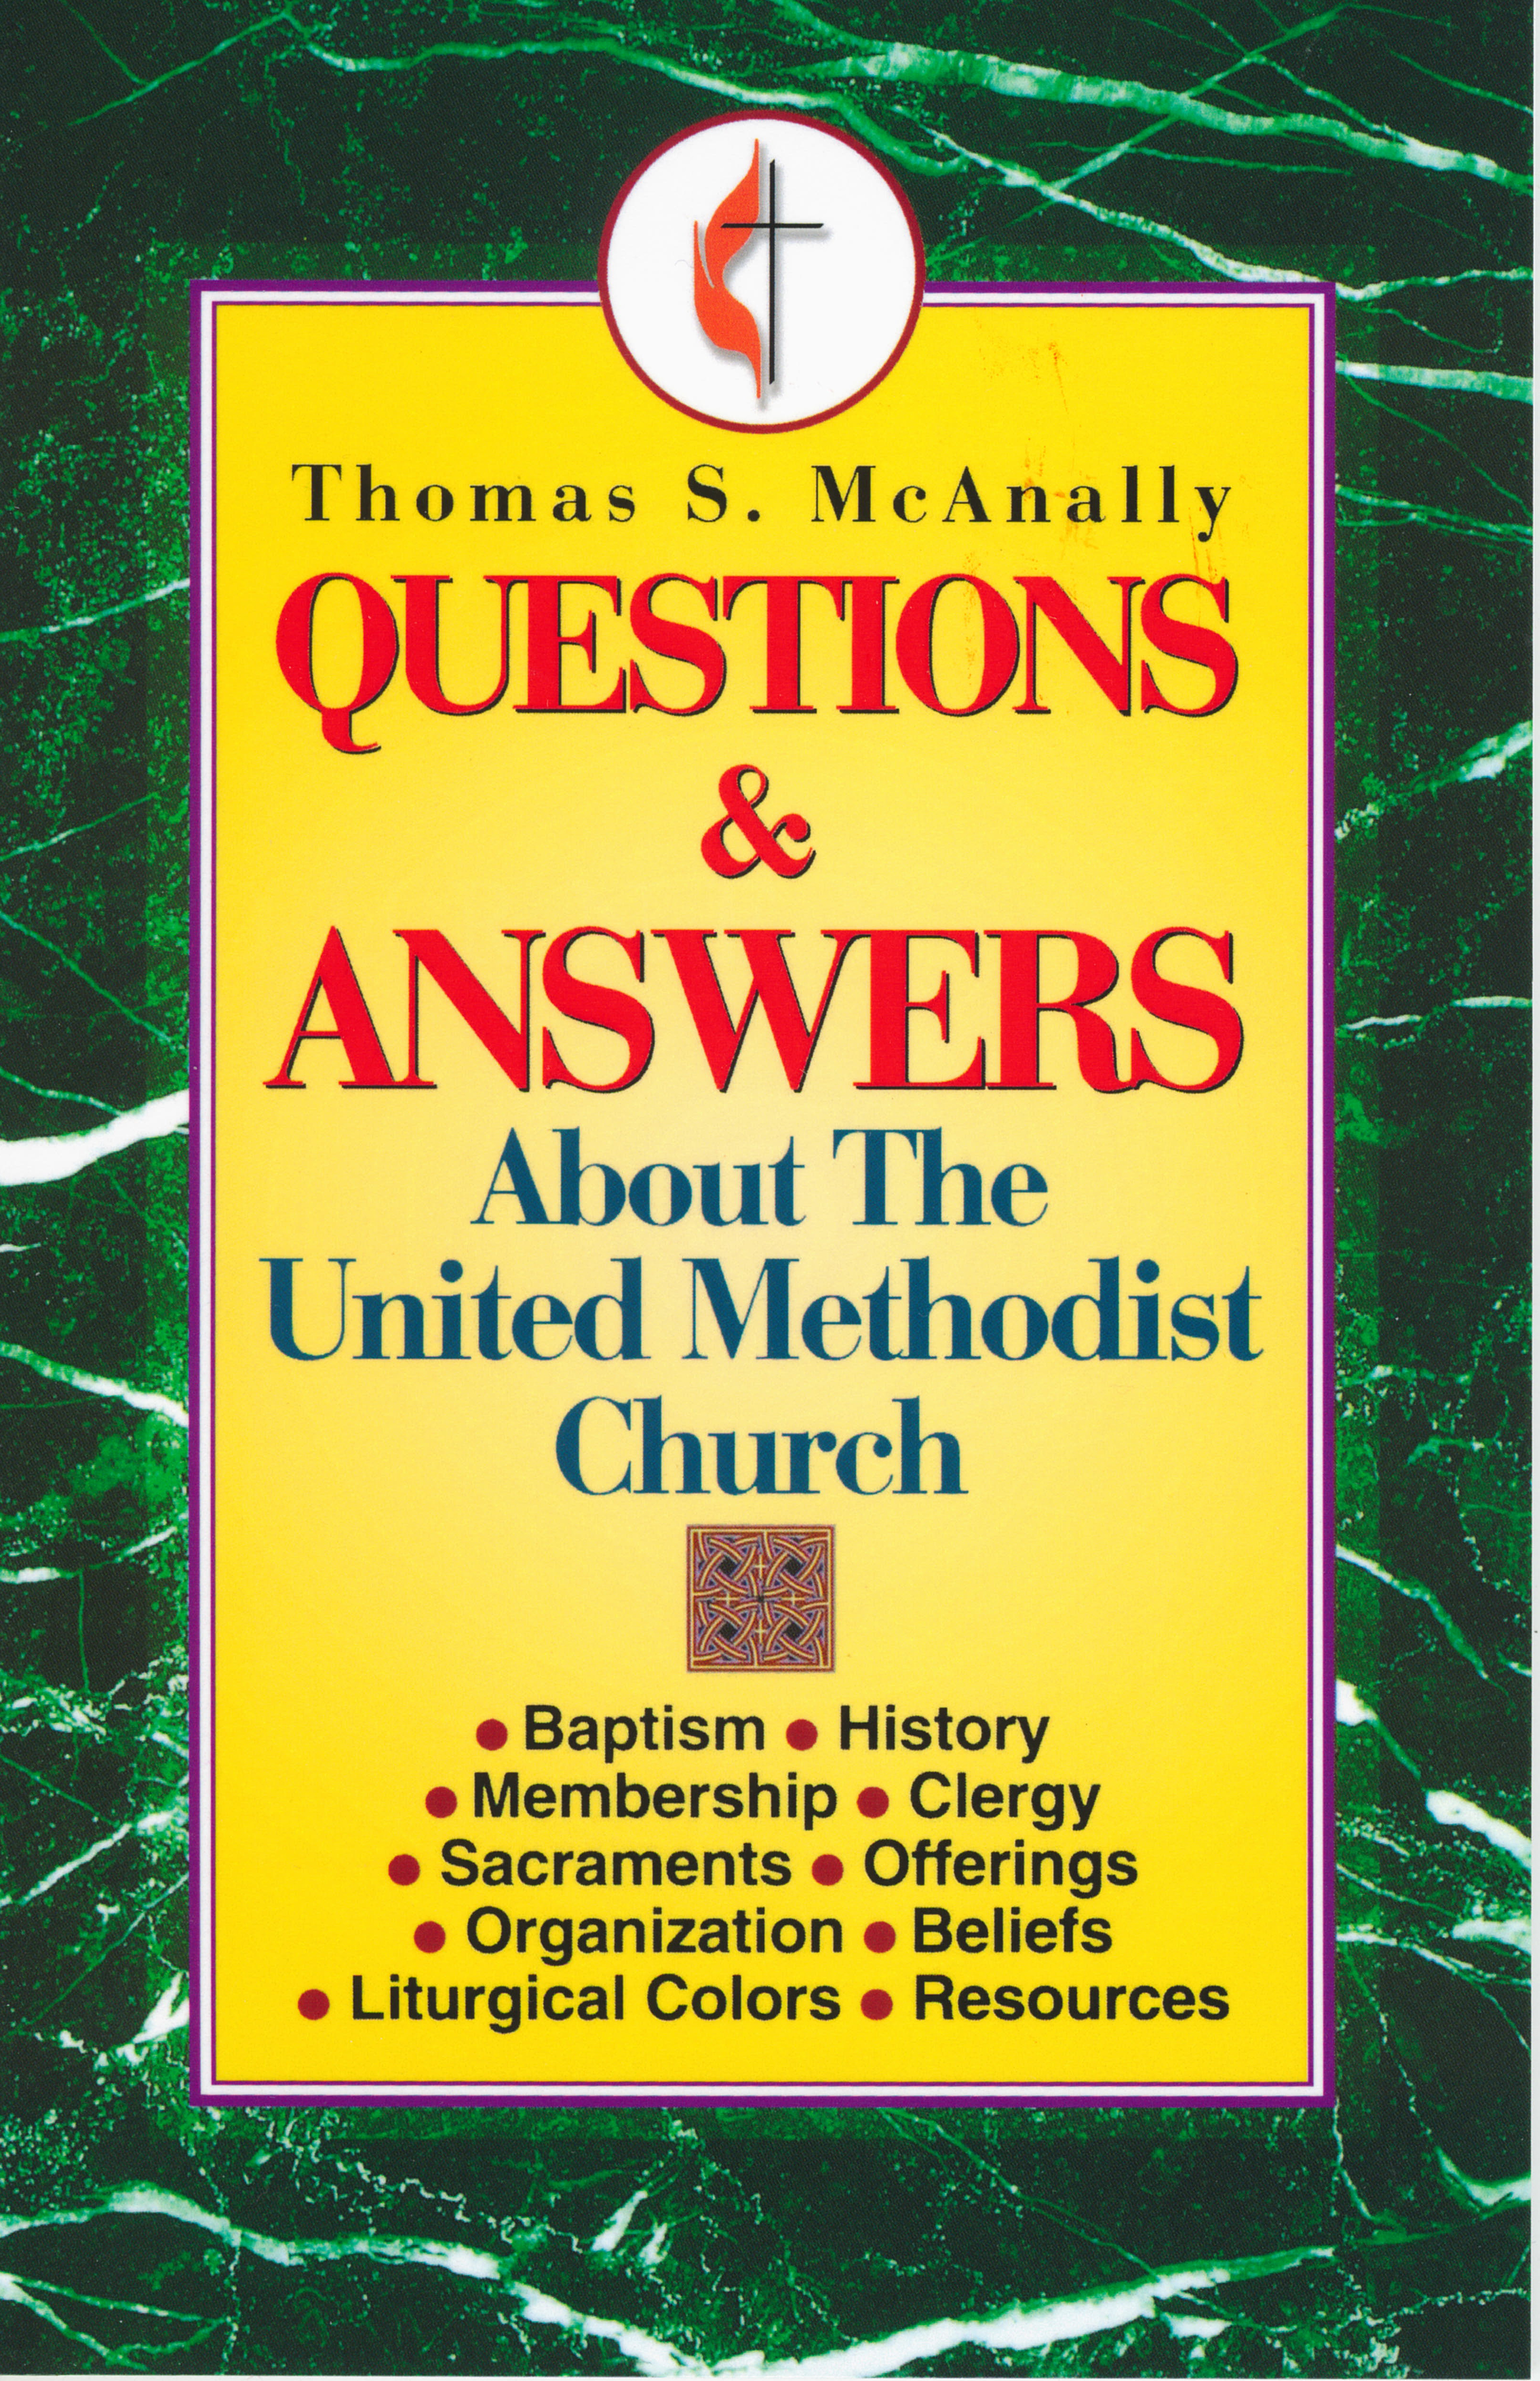 Questions & Answers About The United Methodist Church 108-9780687016709